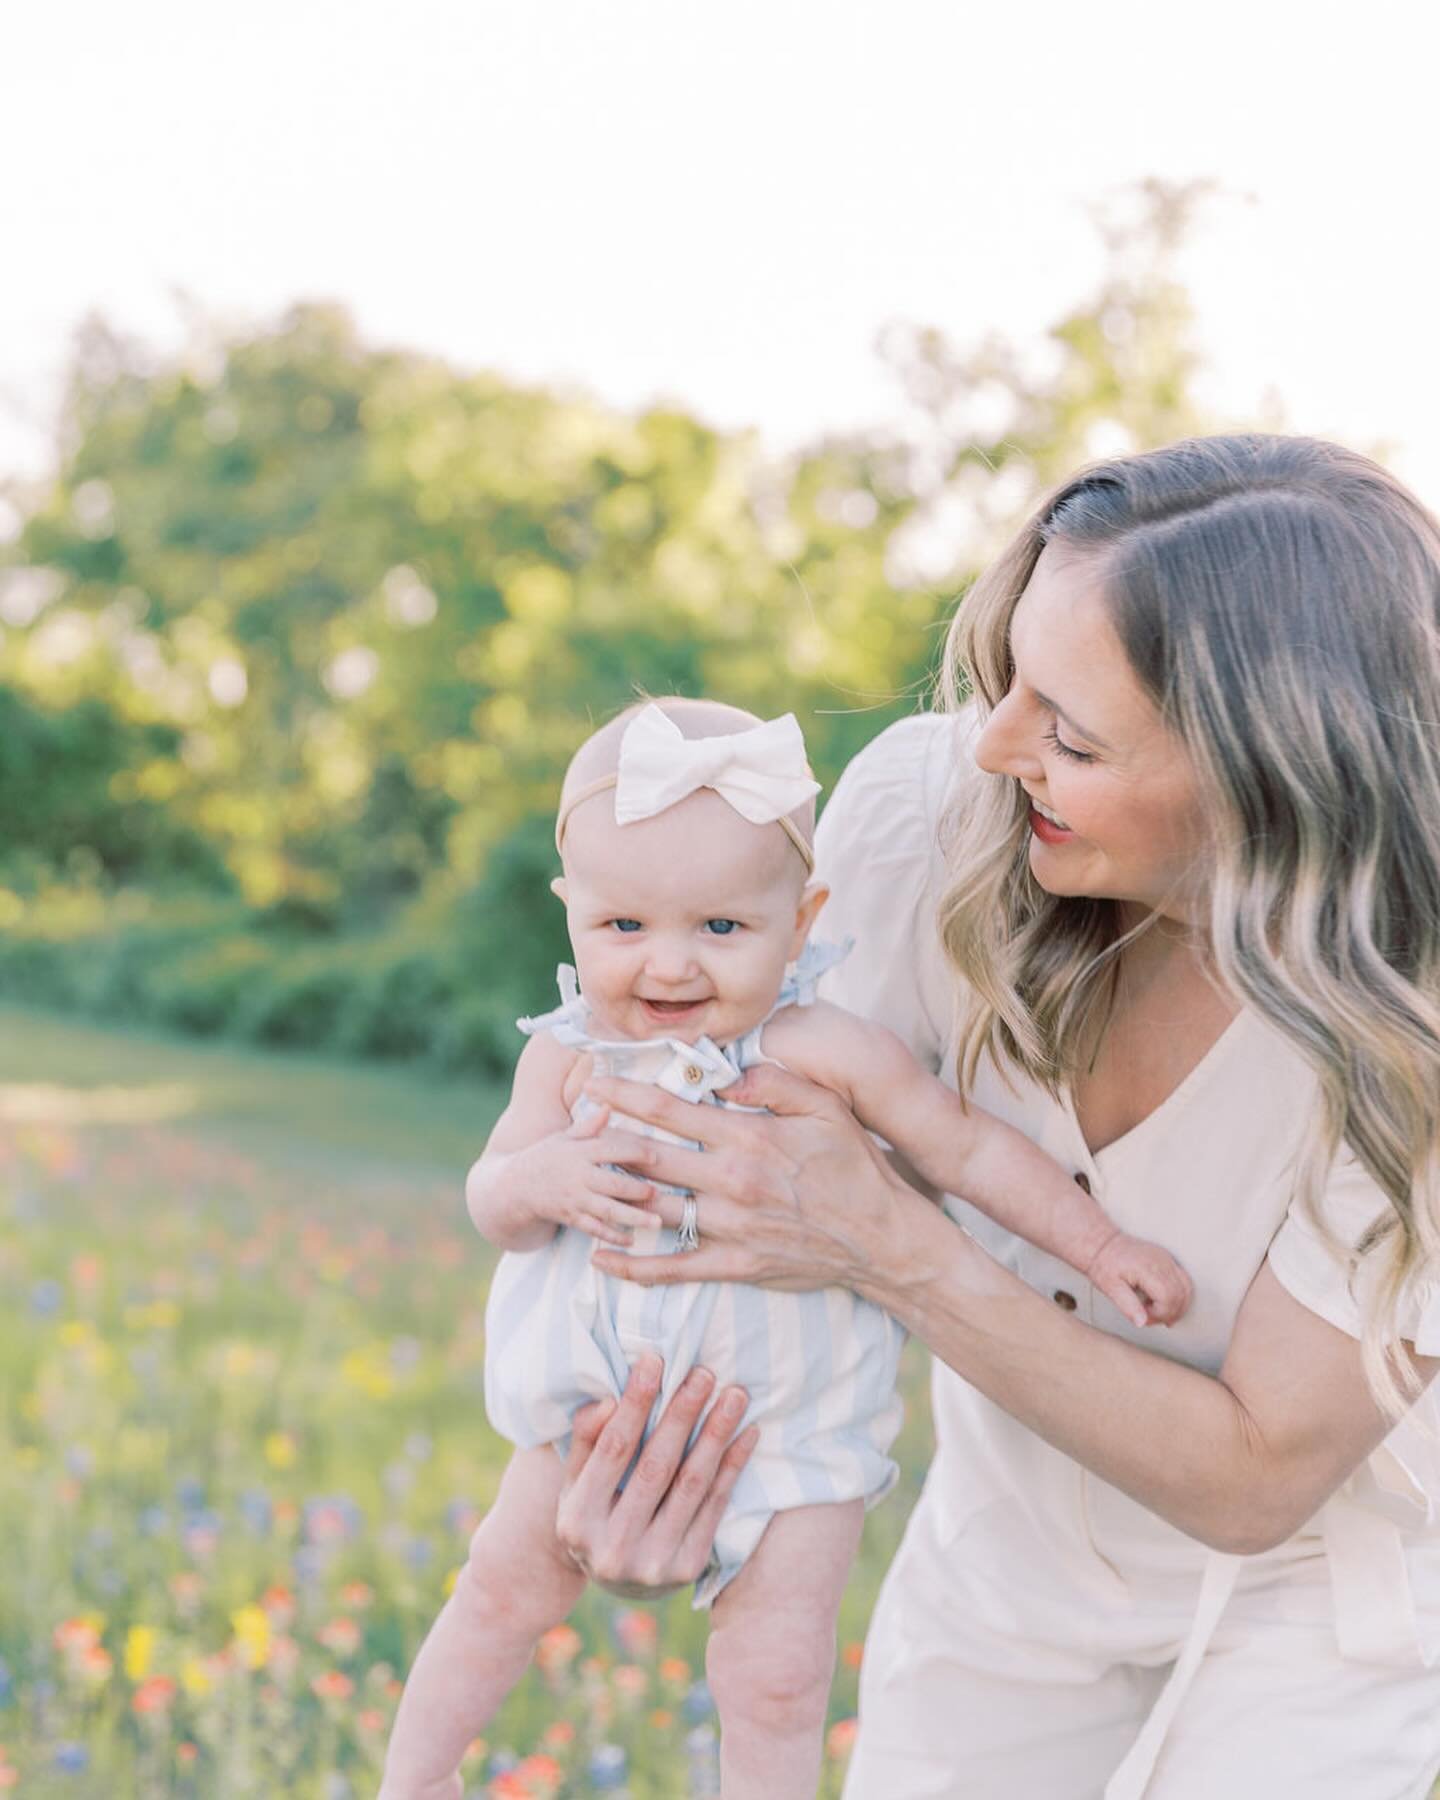 It&rsquo;s always an honor when clients return for updated portraits. Erin wanted photos in the bluebonnets and with her husband&rsquo;s crazy and unpredictable work schedule, she opted for mommy &amp; me photos instead! Erin absolutely ROCKED this s